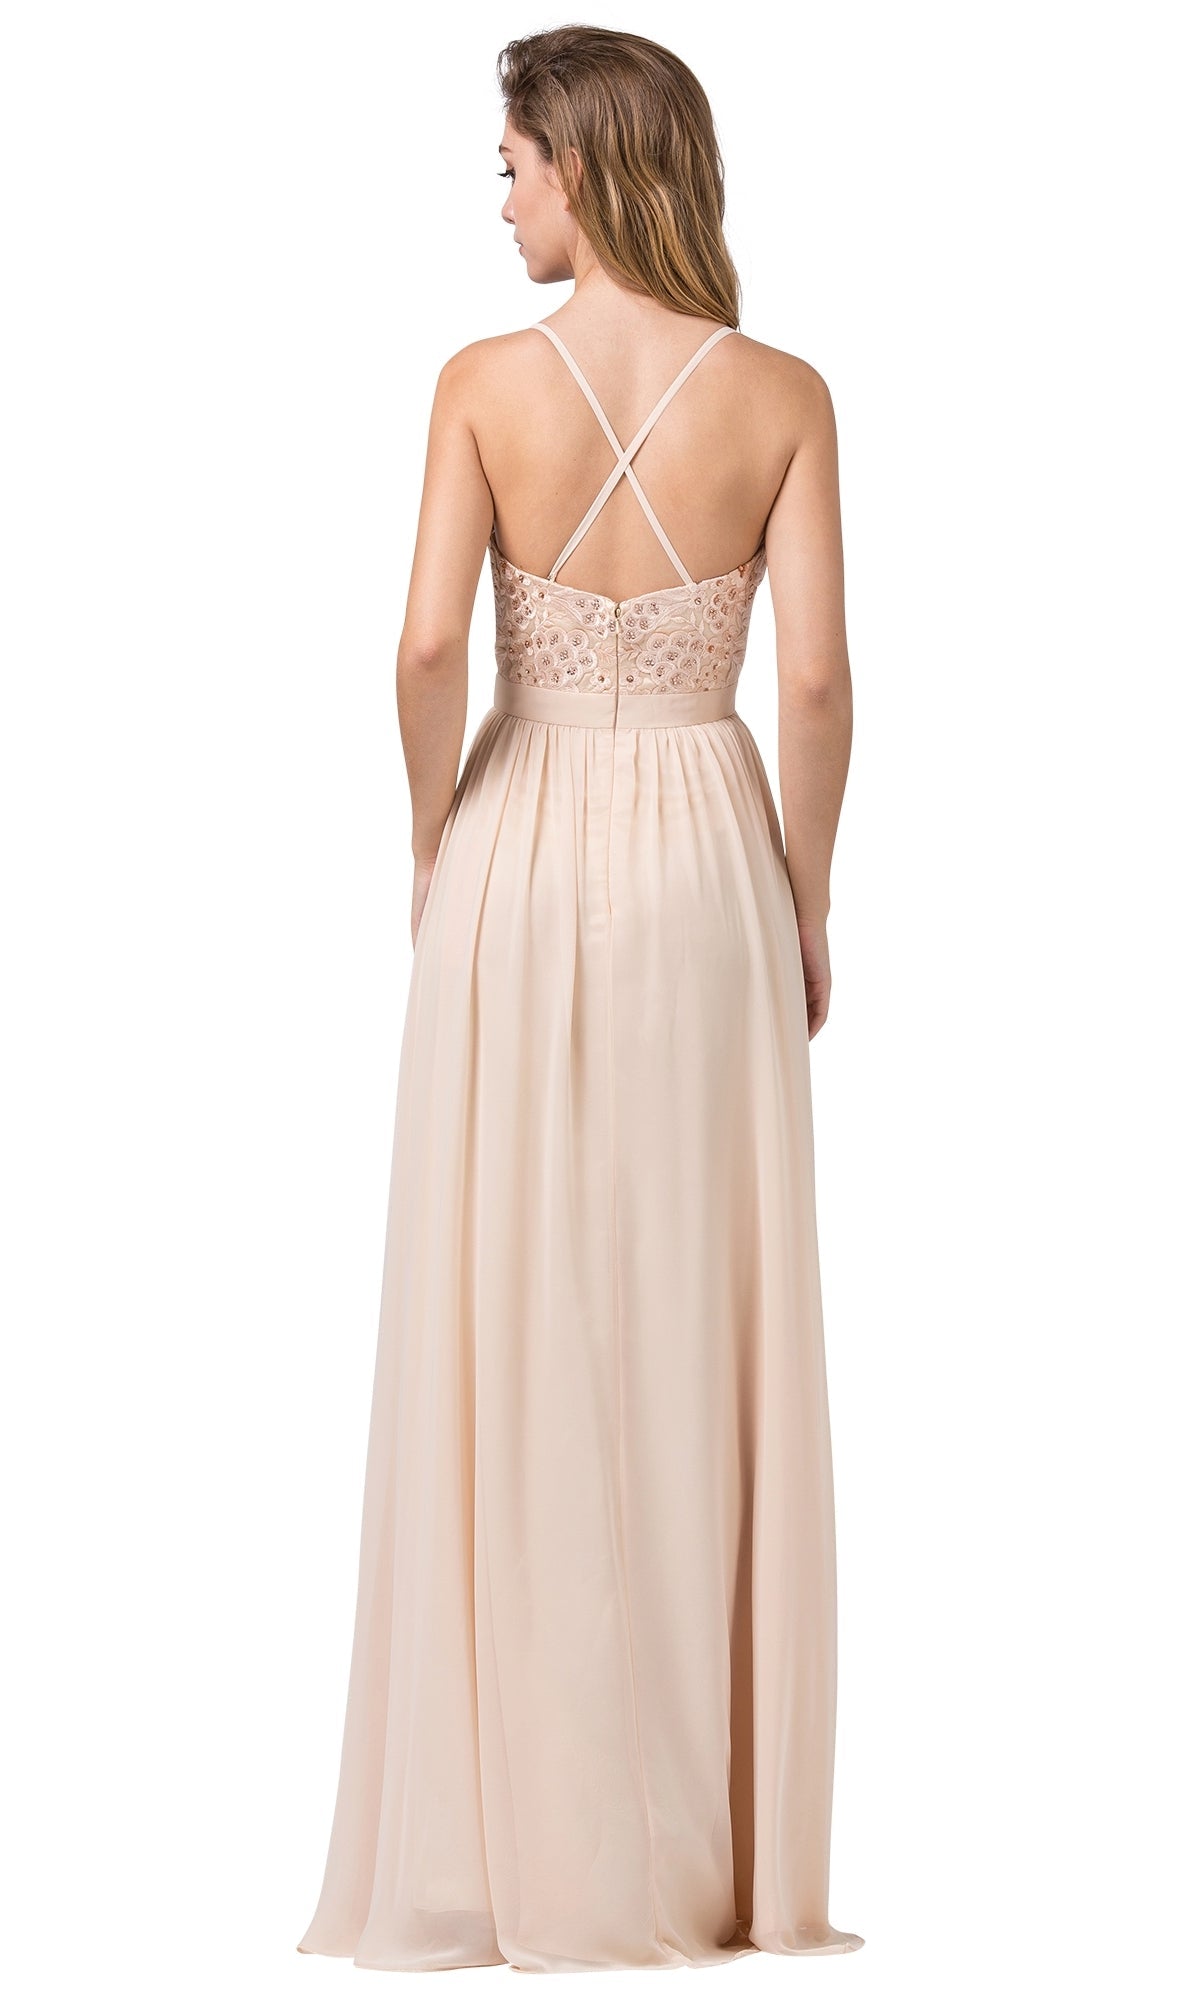  V-Neck Chiffon Formal Evening Dress with Embroidery